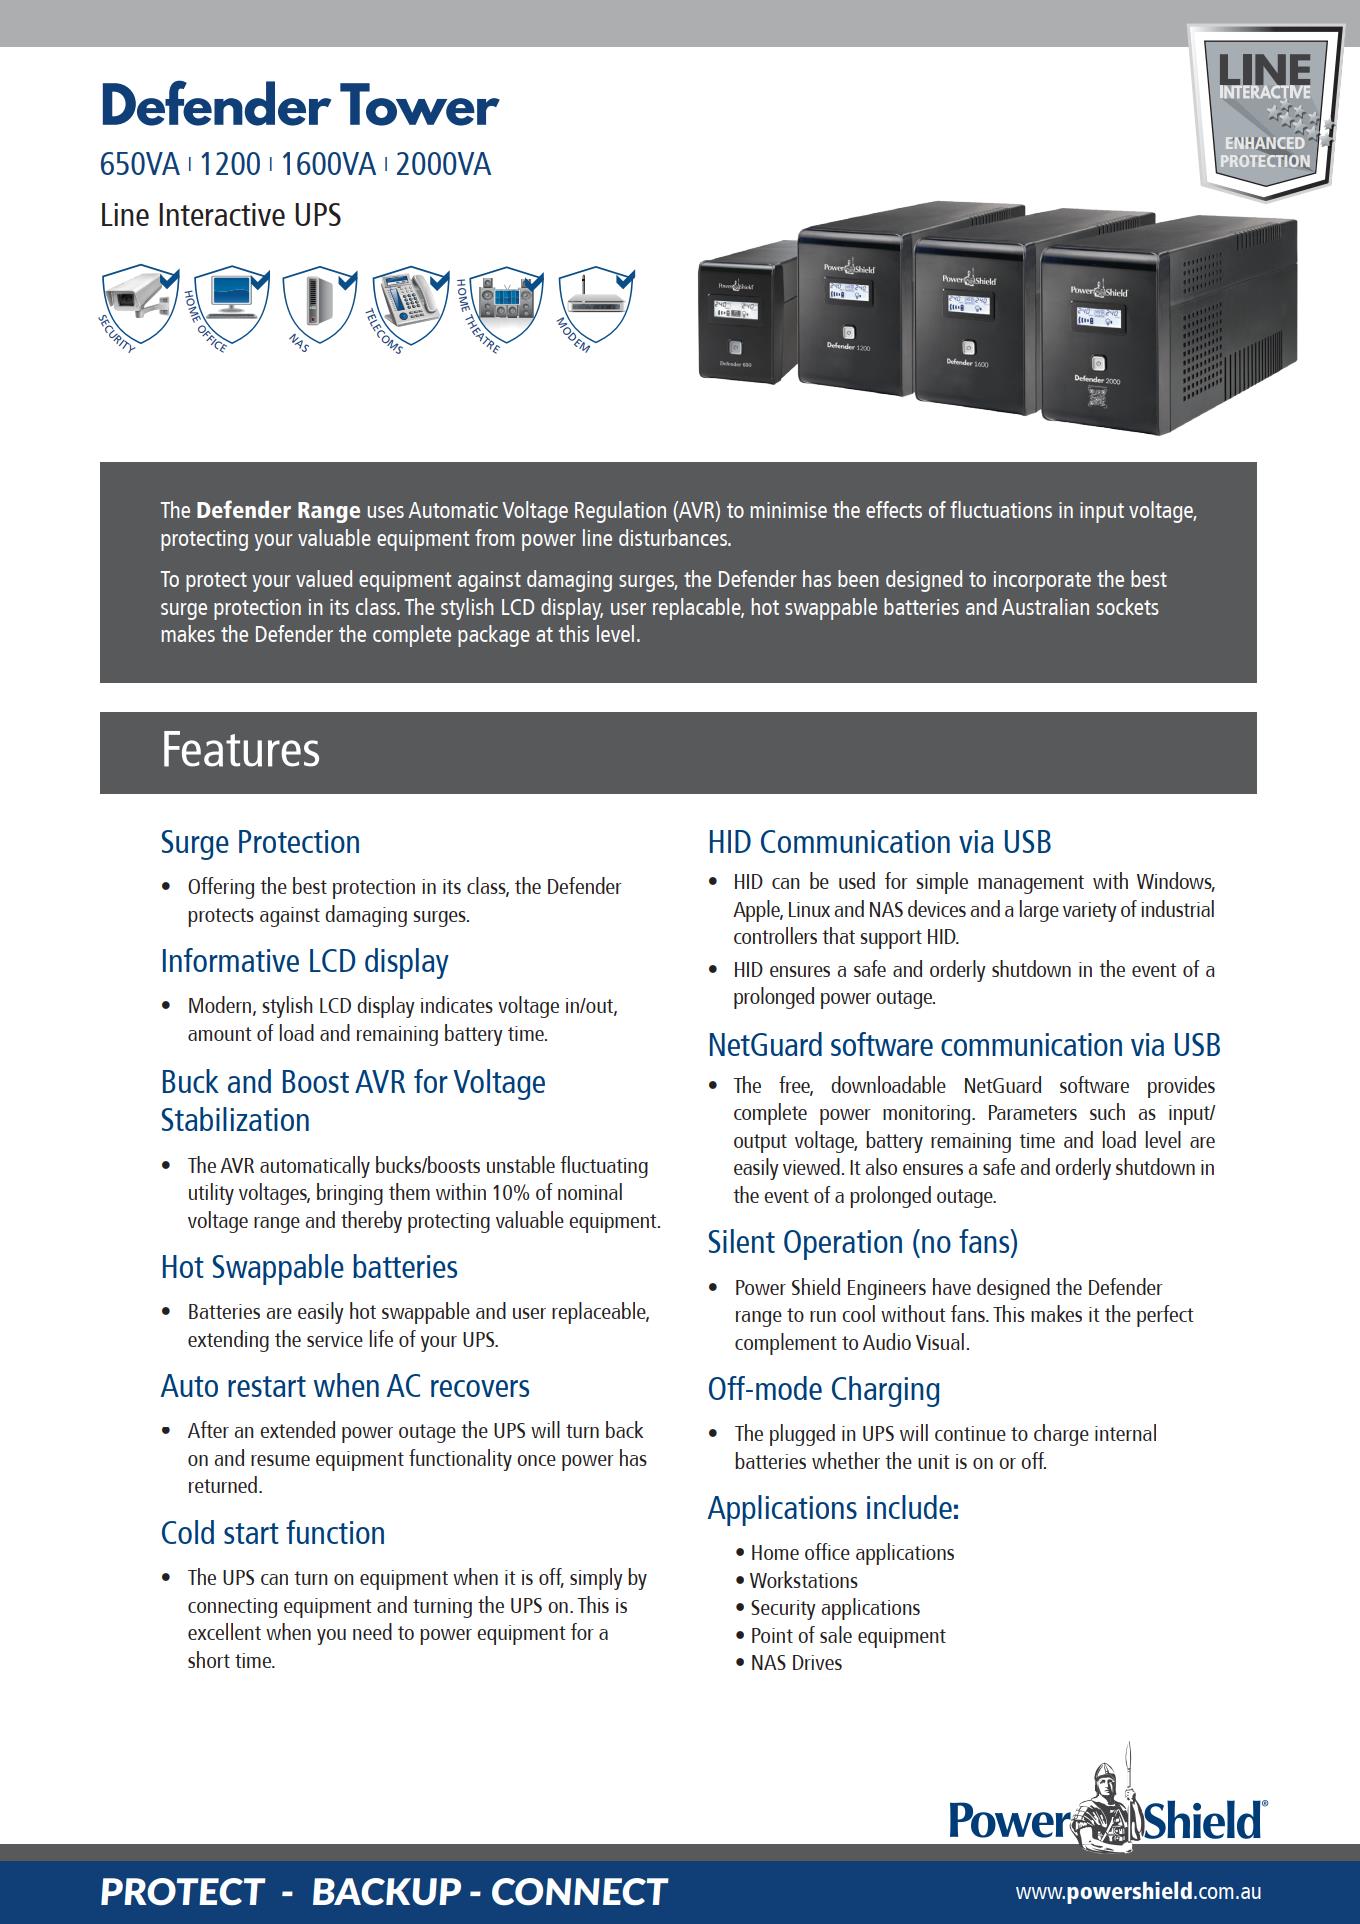 A large marketing image providing additional information about the product PowerShield Defender LCD 650VA UPS - Additional alt info not provided